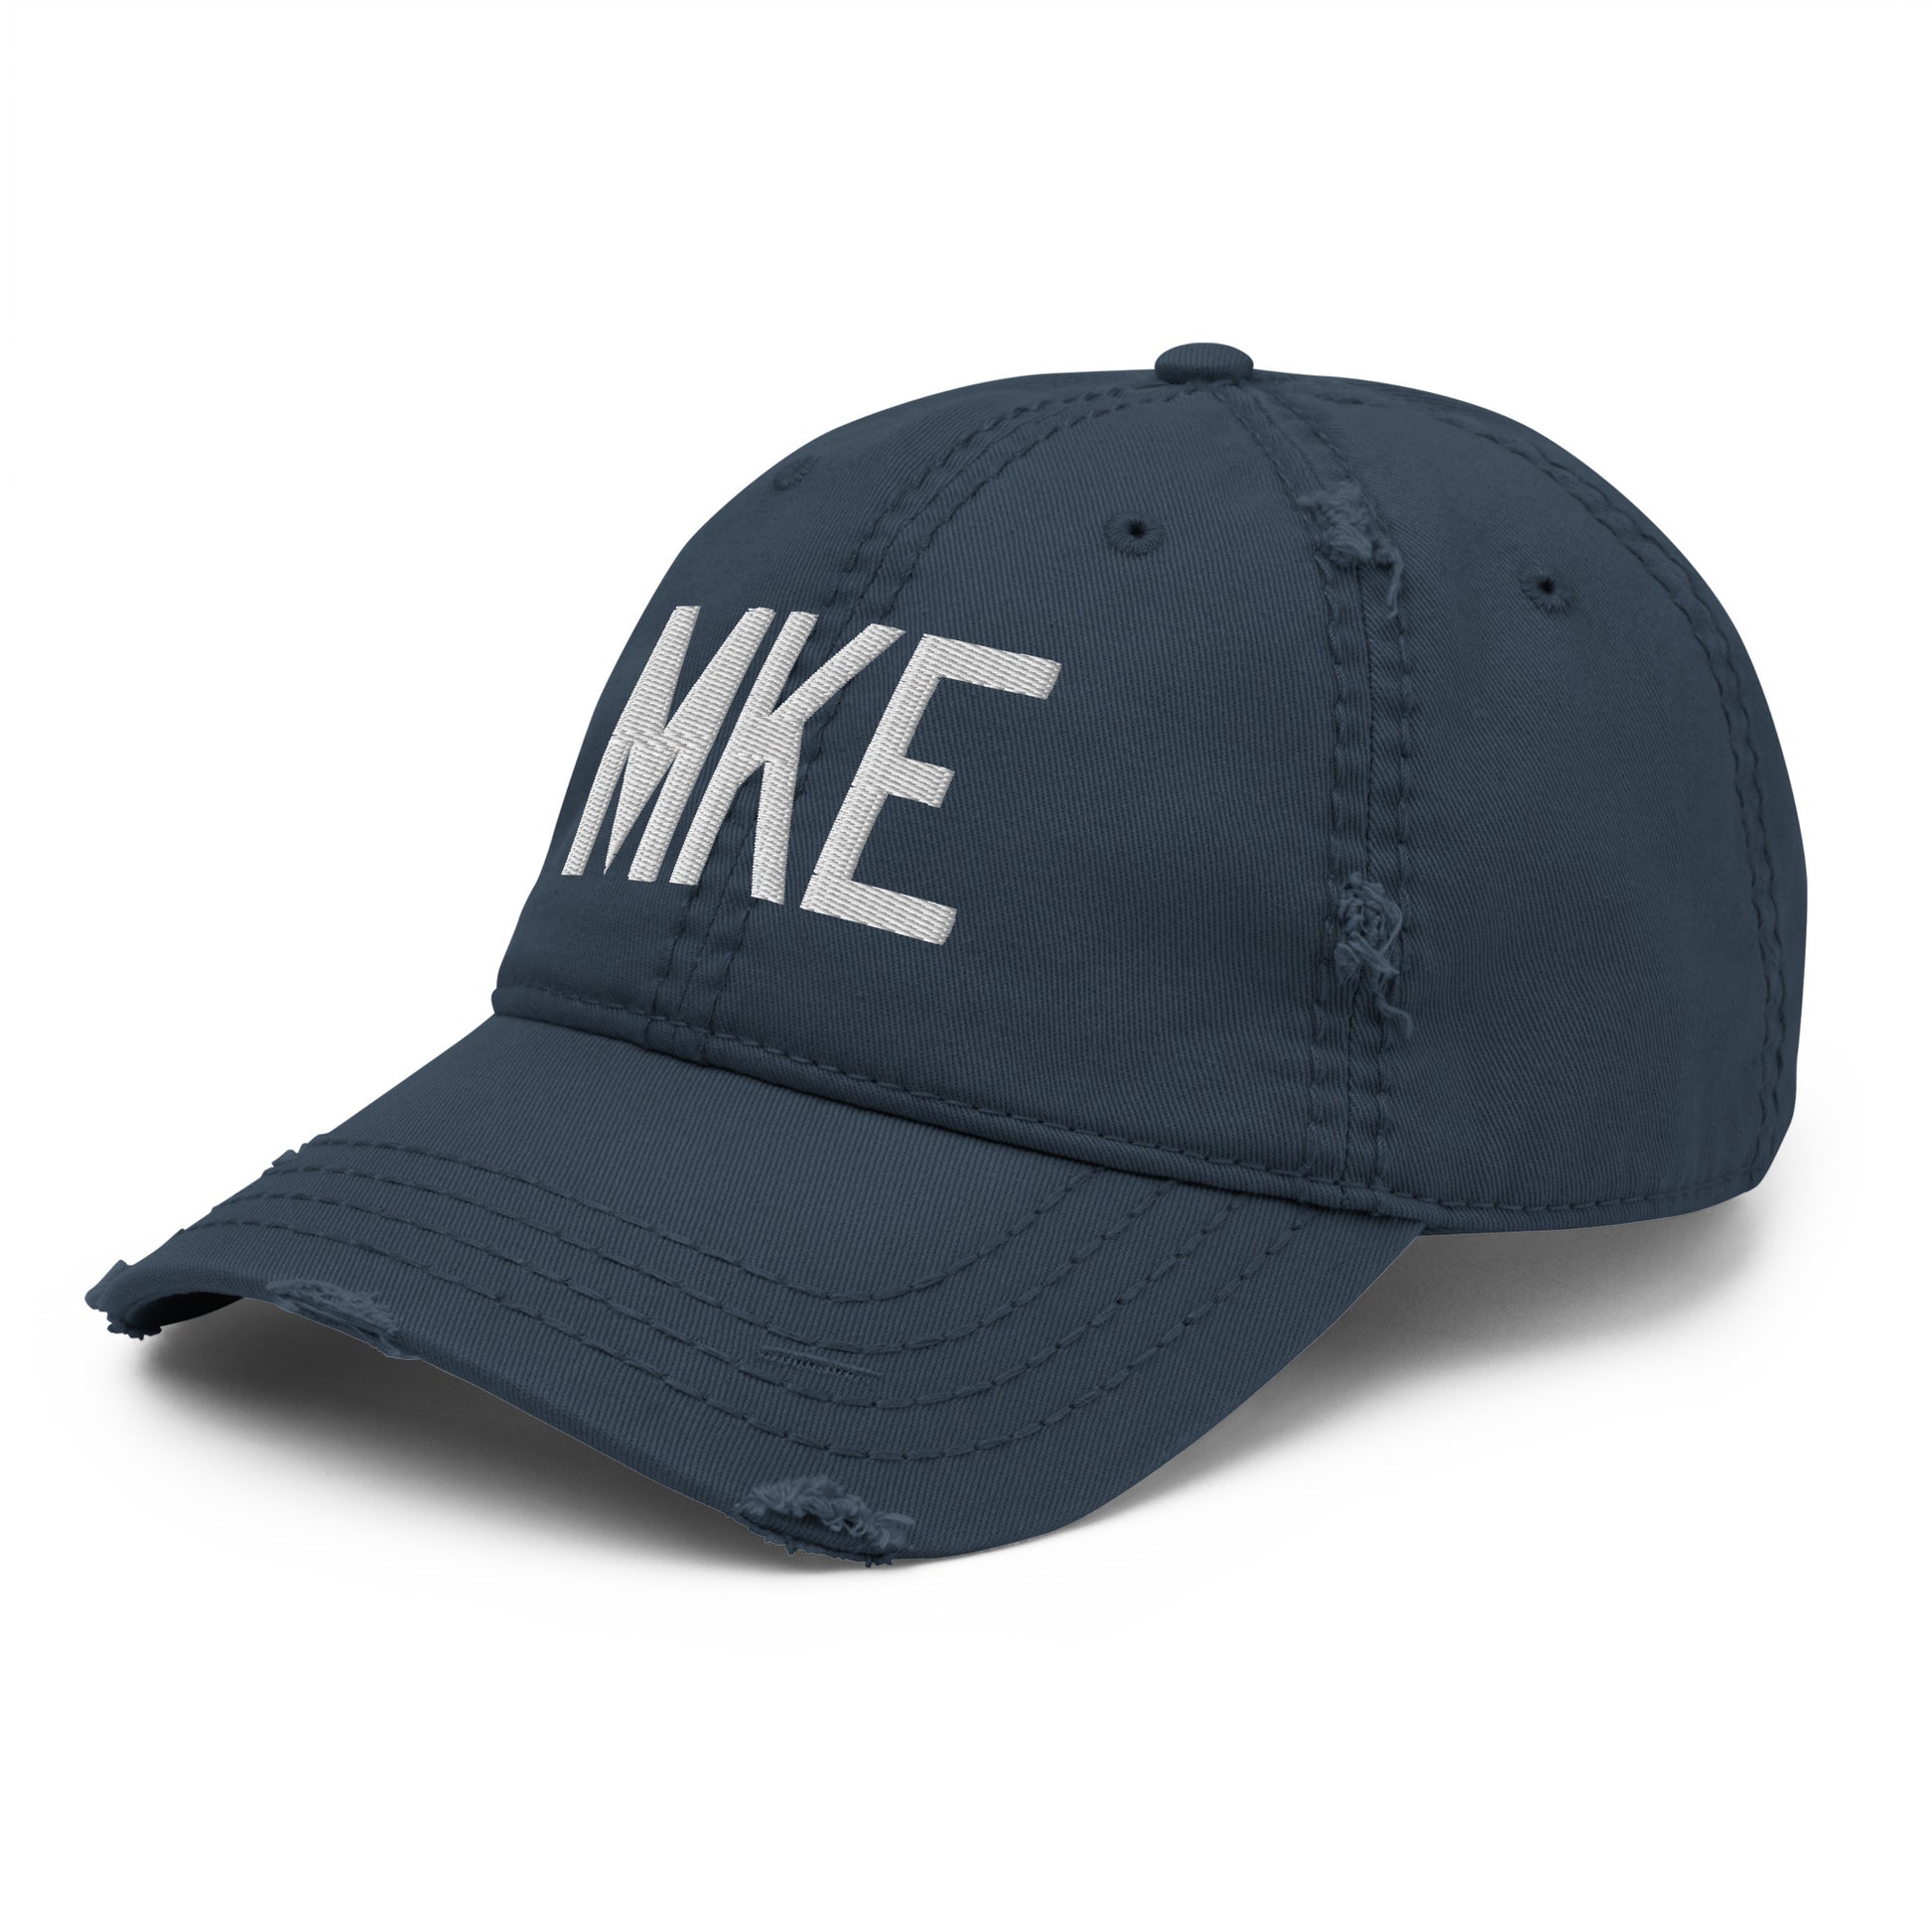 Airport Code Distressed Hat - White • MKE Milwaukee • YHM Designs - Image 01